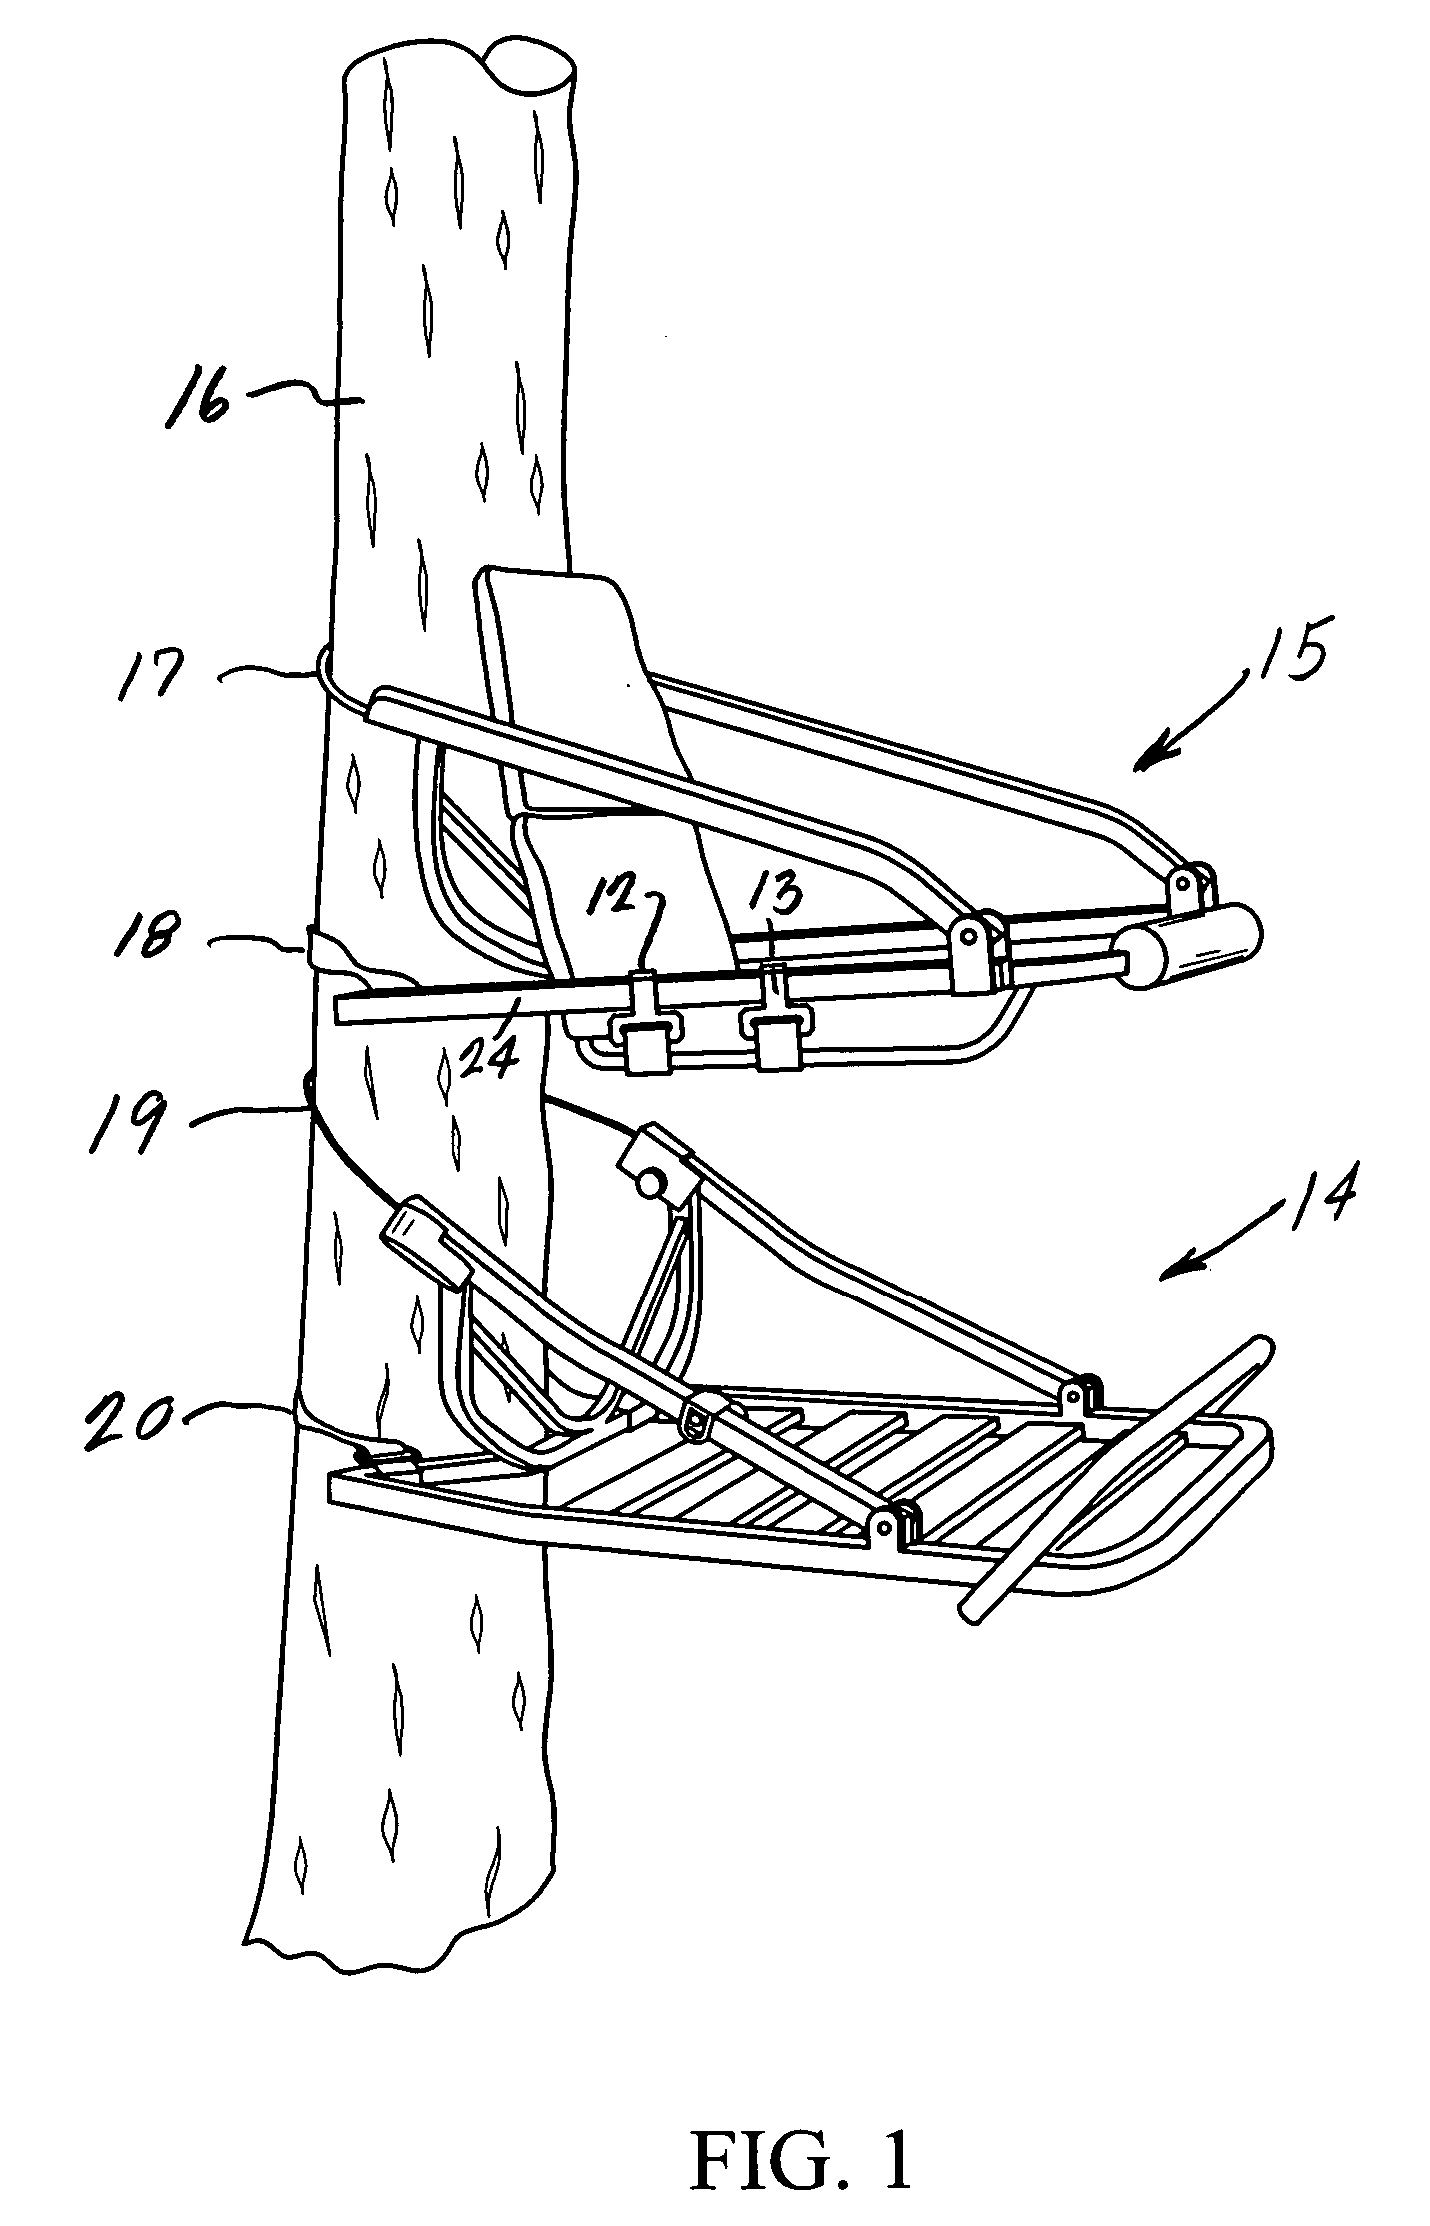 Suspended seat bracket hook device, and methods of constructing and utilizing same